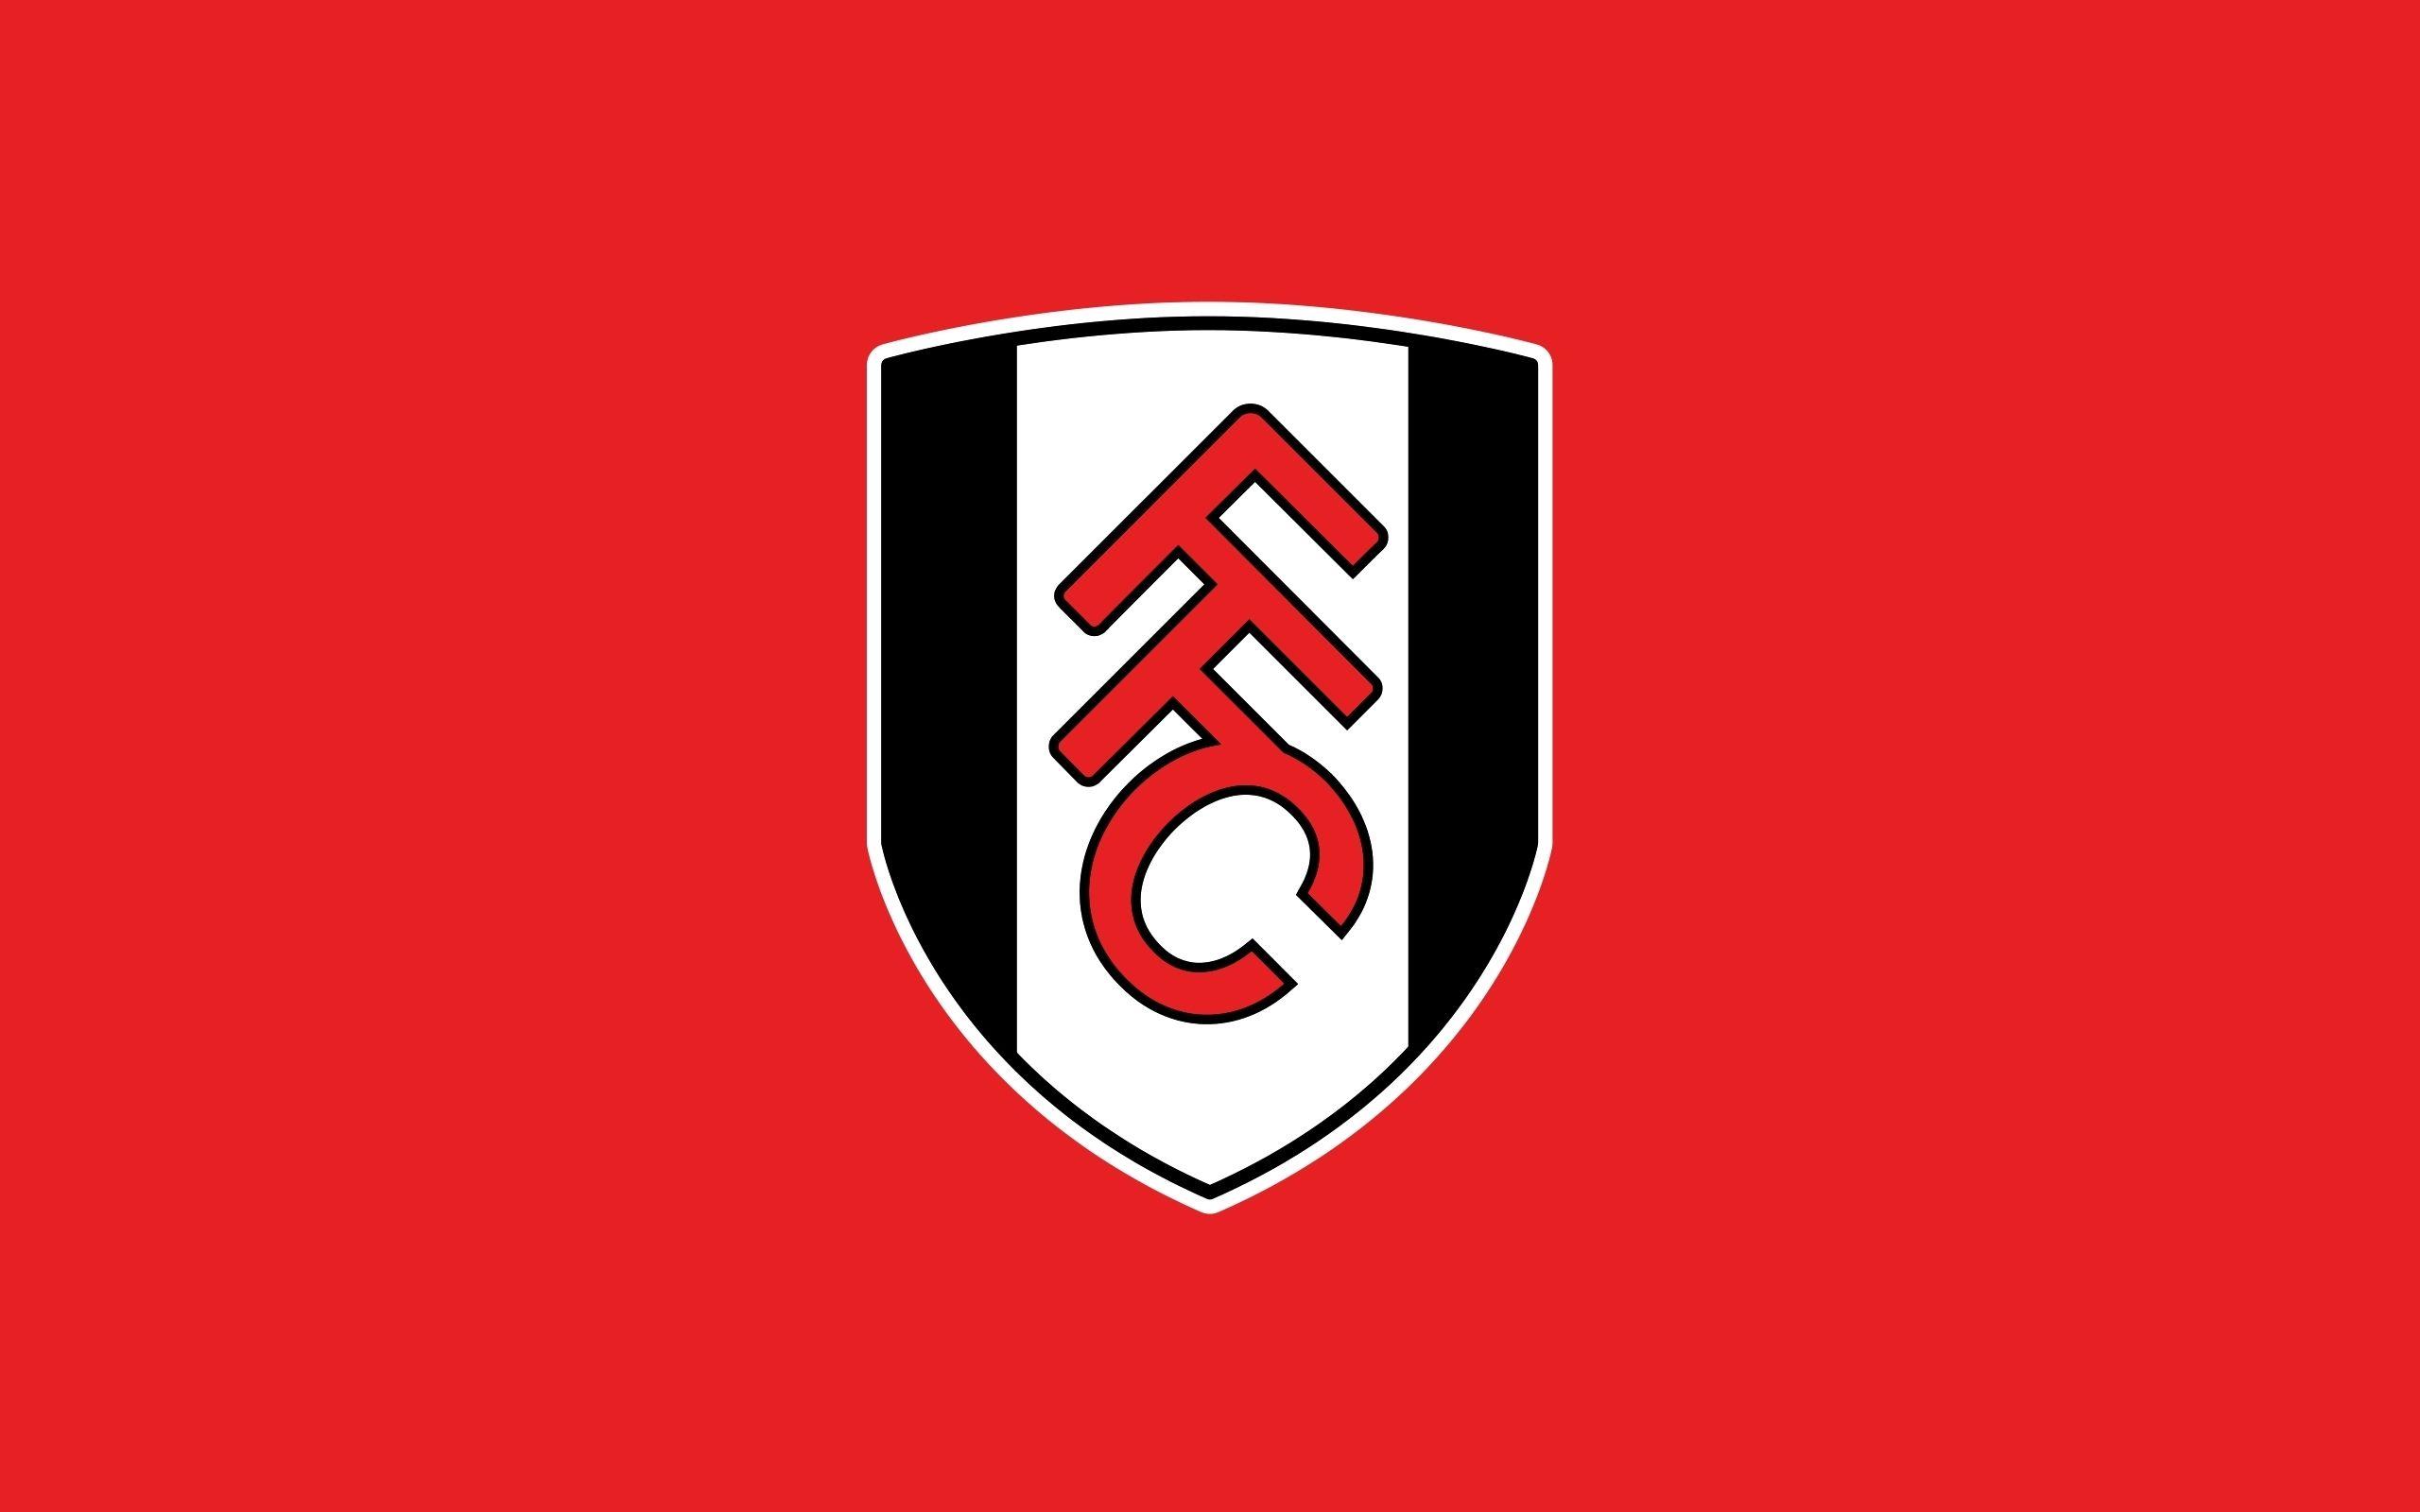 Fulham F.C. Wallpapers